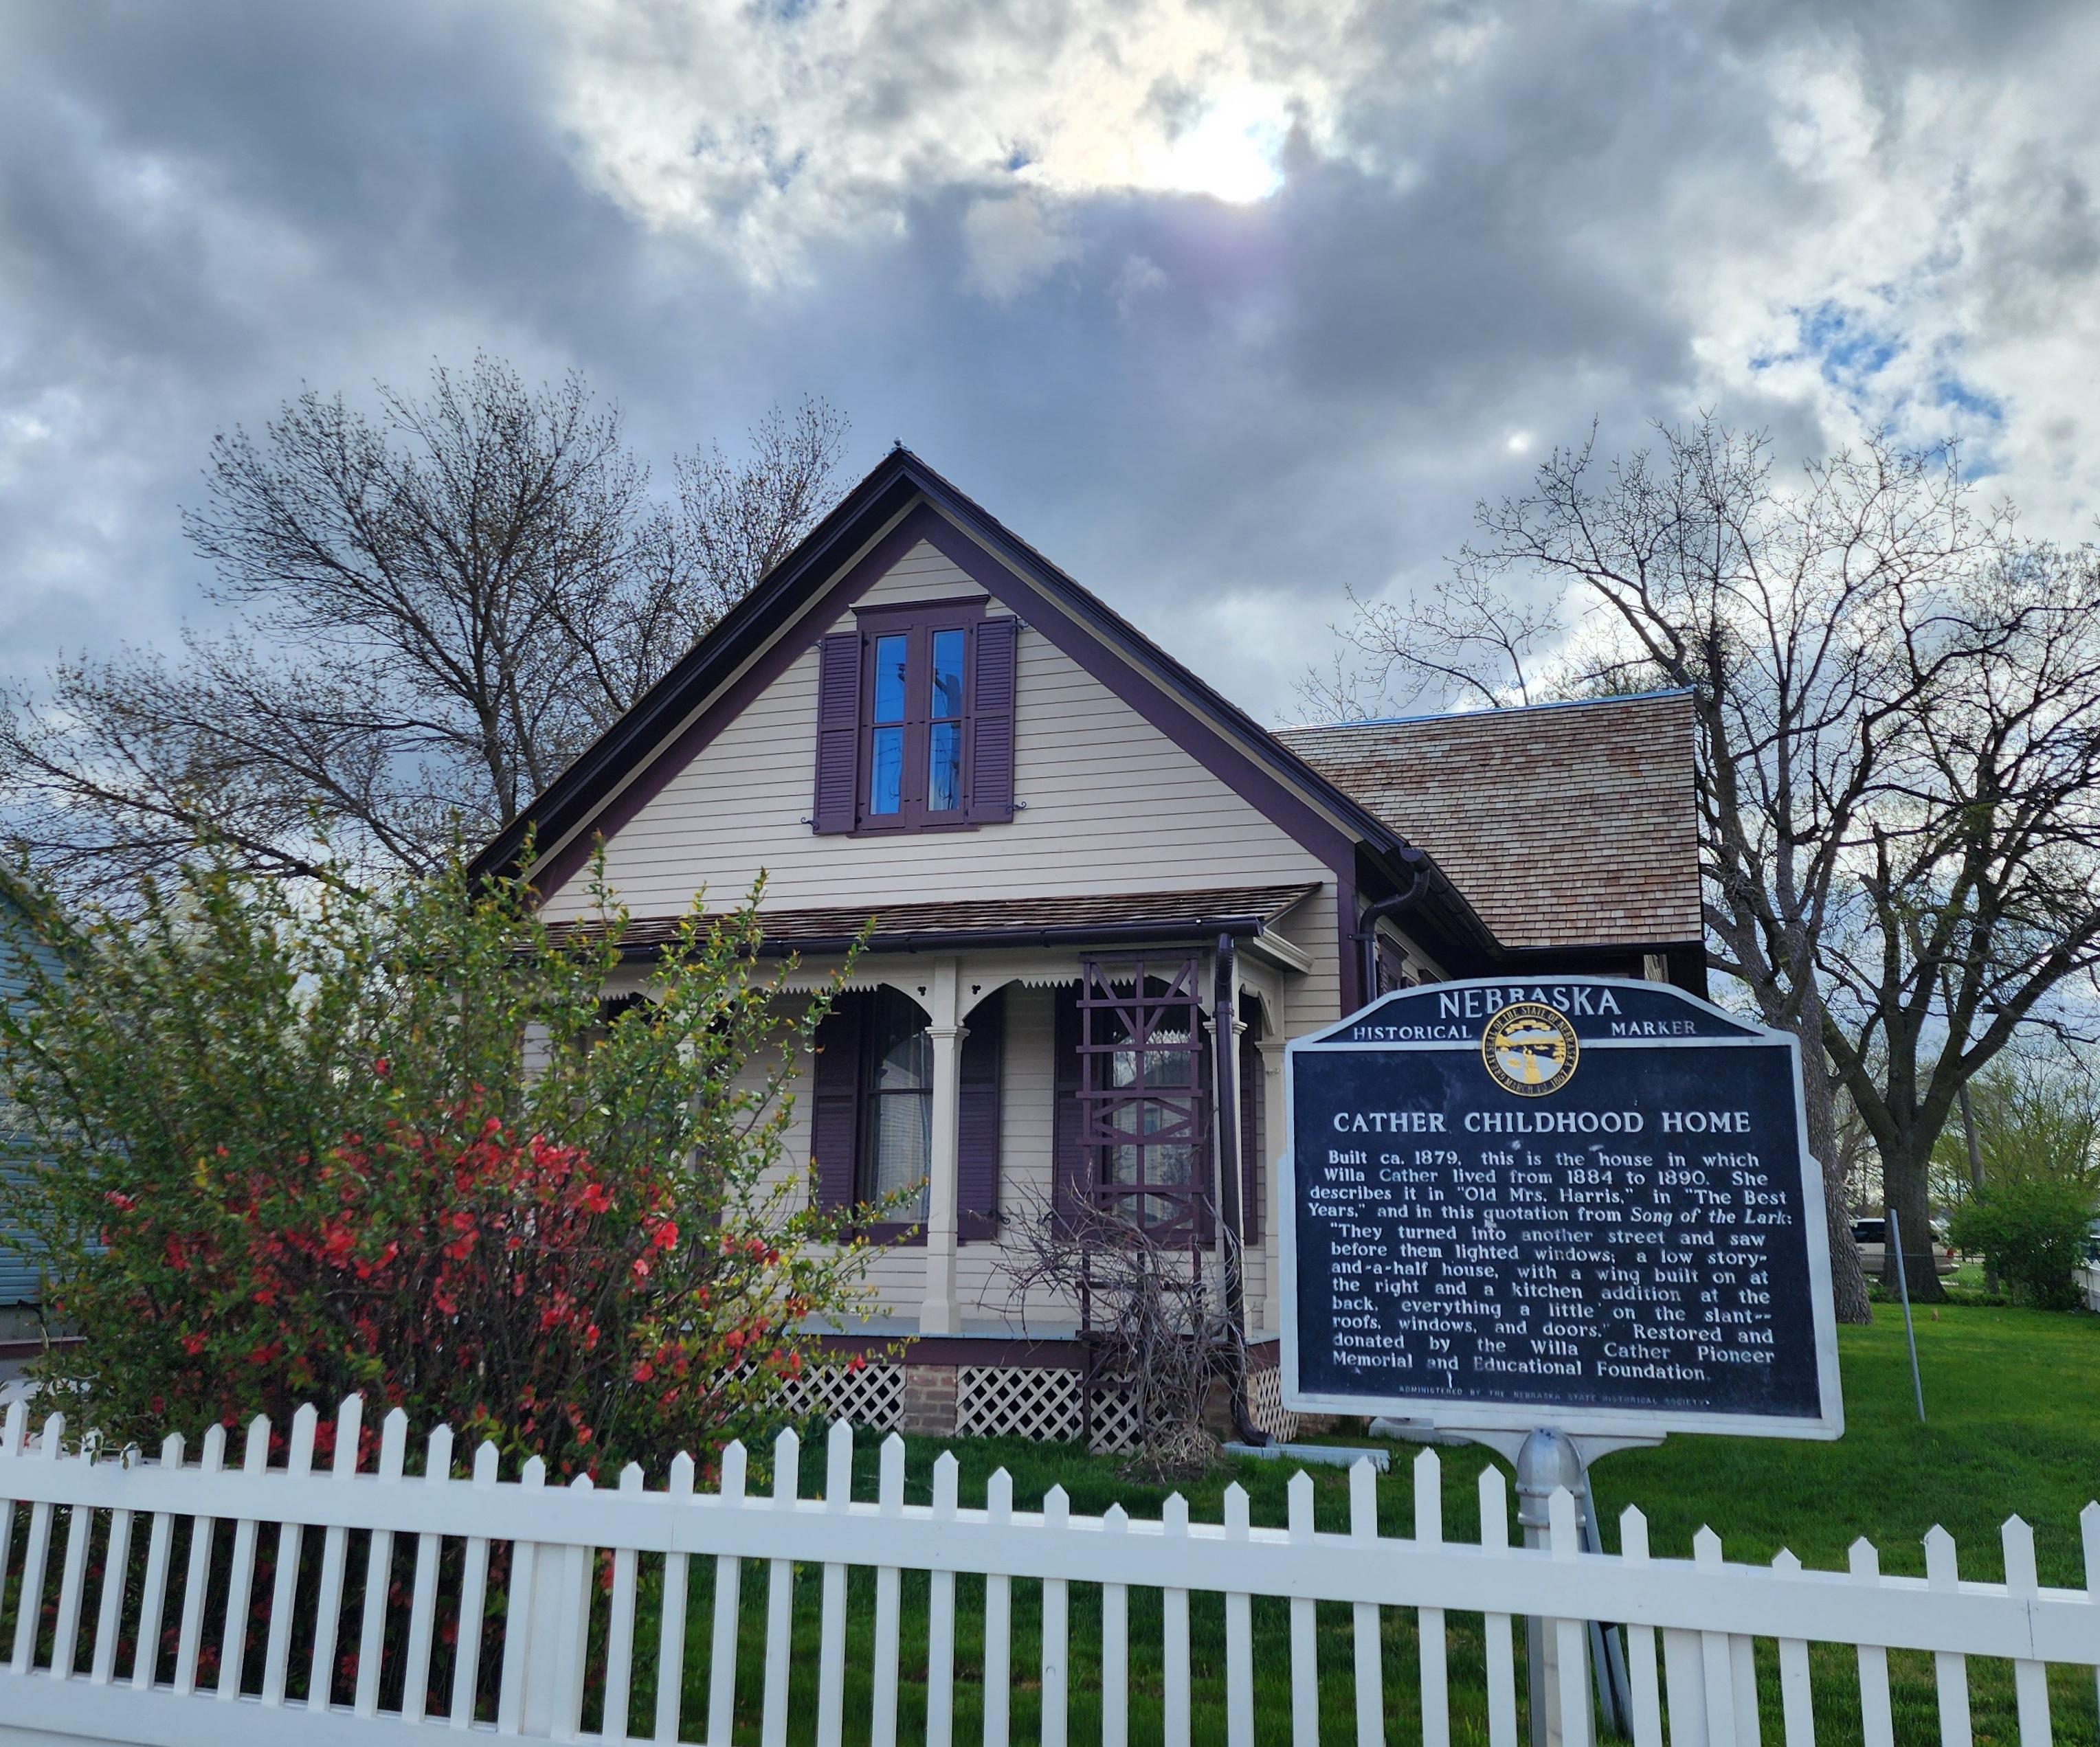 Willa Cather Childhood Home